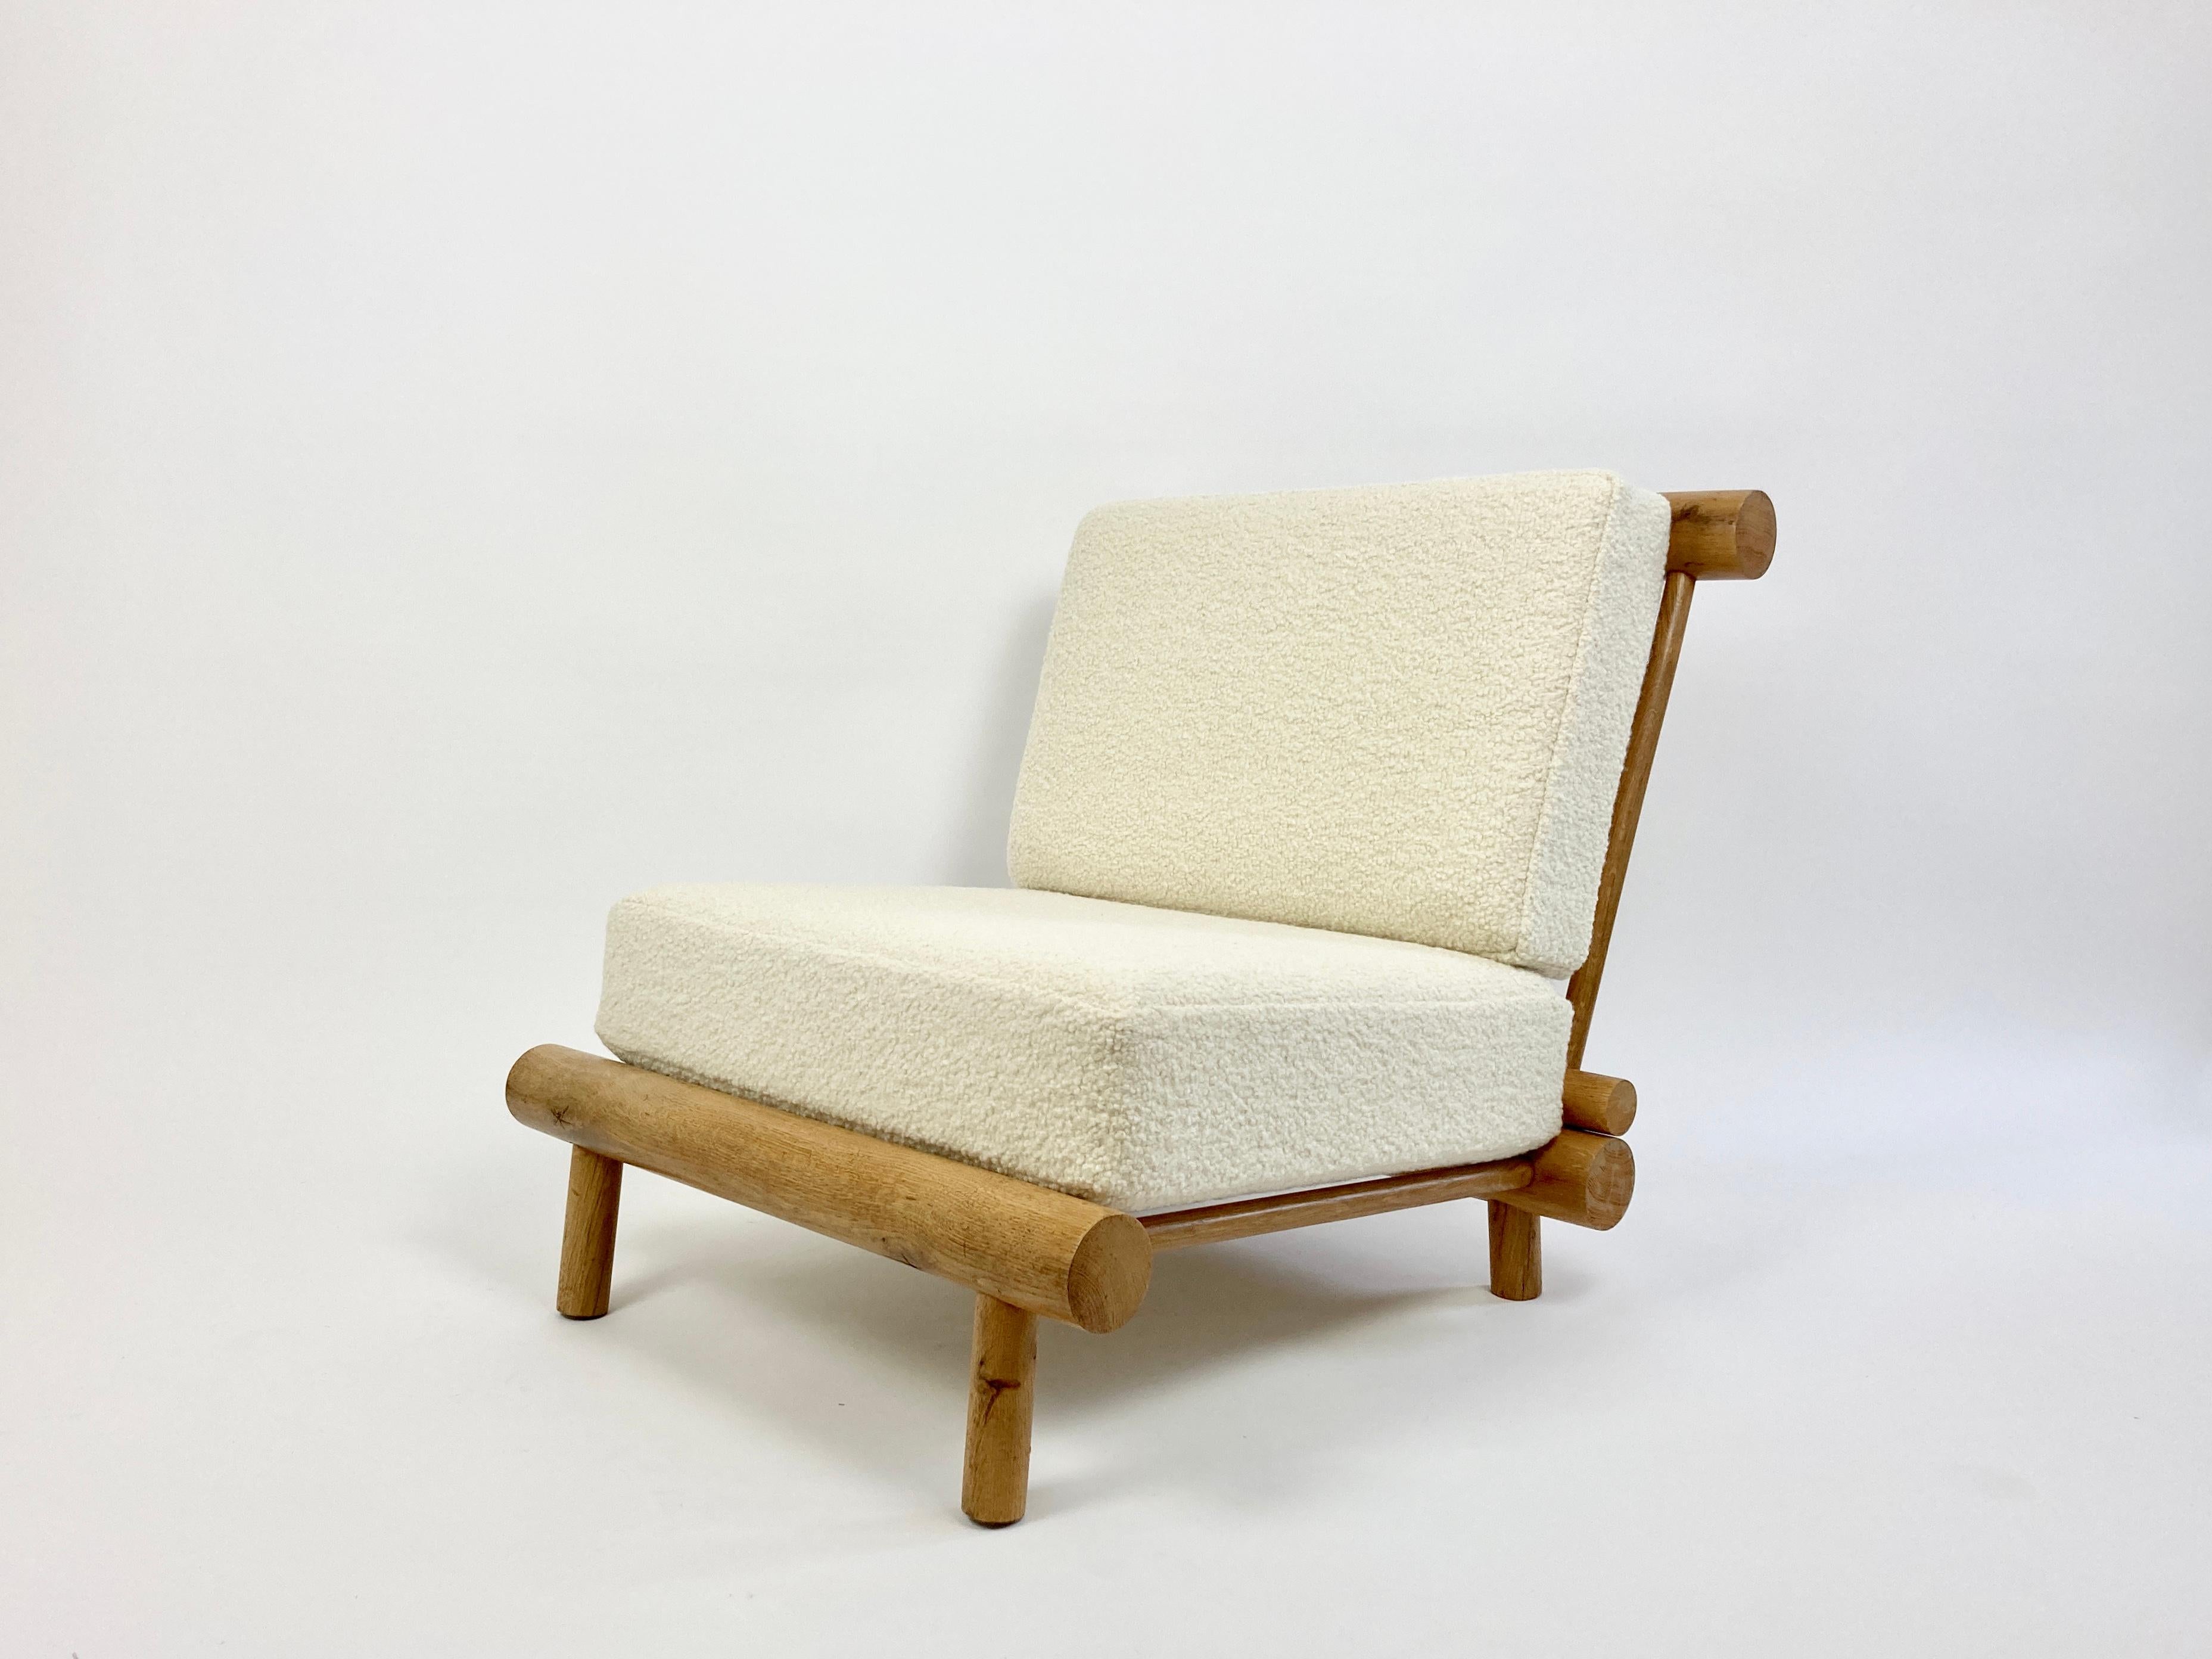 2 available - Frames only. Custom made cushions in a choice of natural fabrics are available on request.

1960s Charlotte Perriand fireside or 'chauffeuse' chairs for Résidence La Cachette, Arc 1600, France.

Made of cylindrical sections of solid